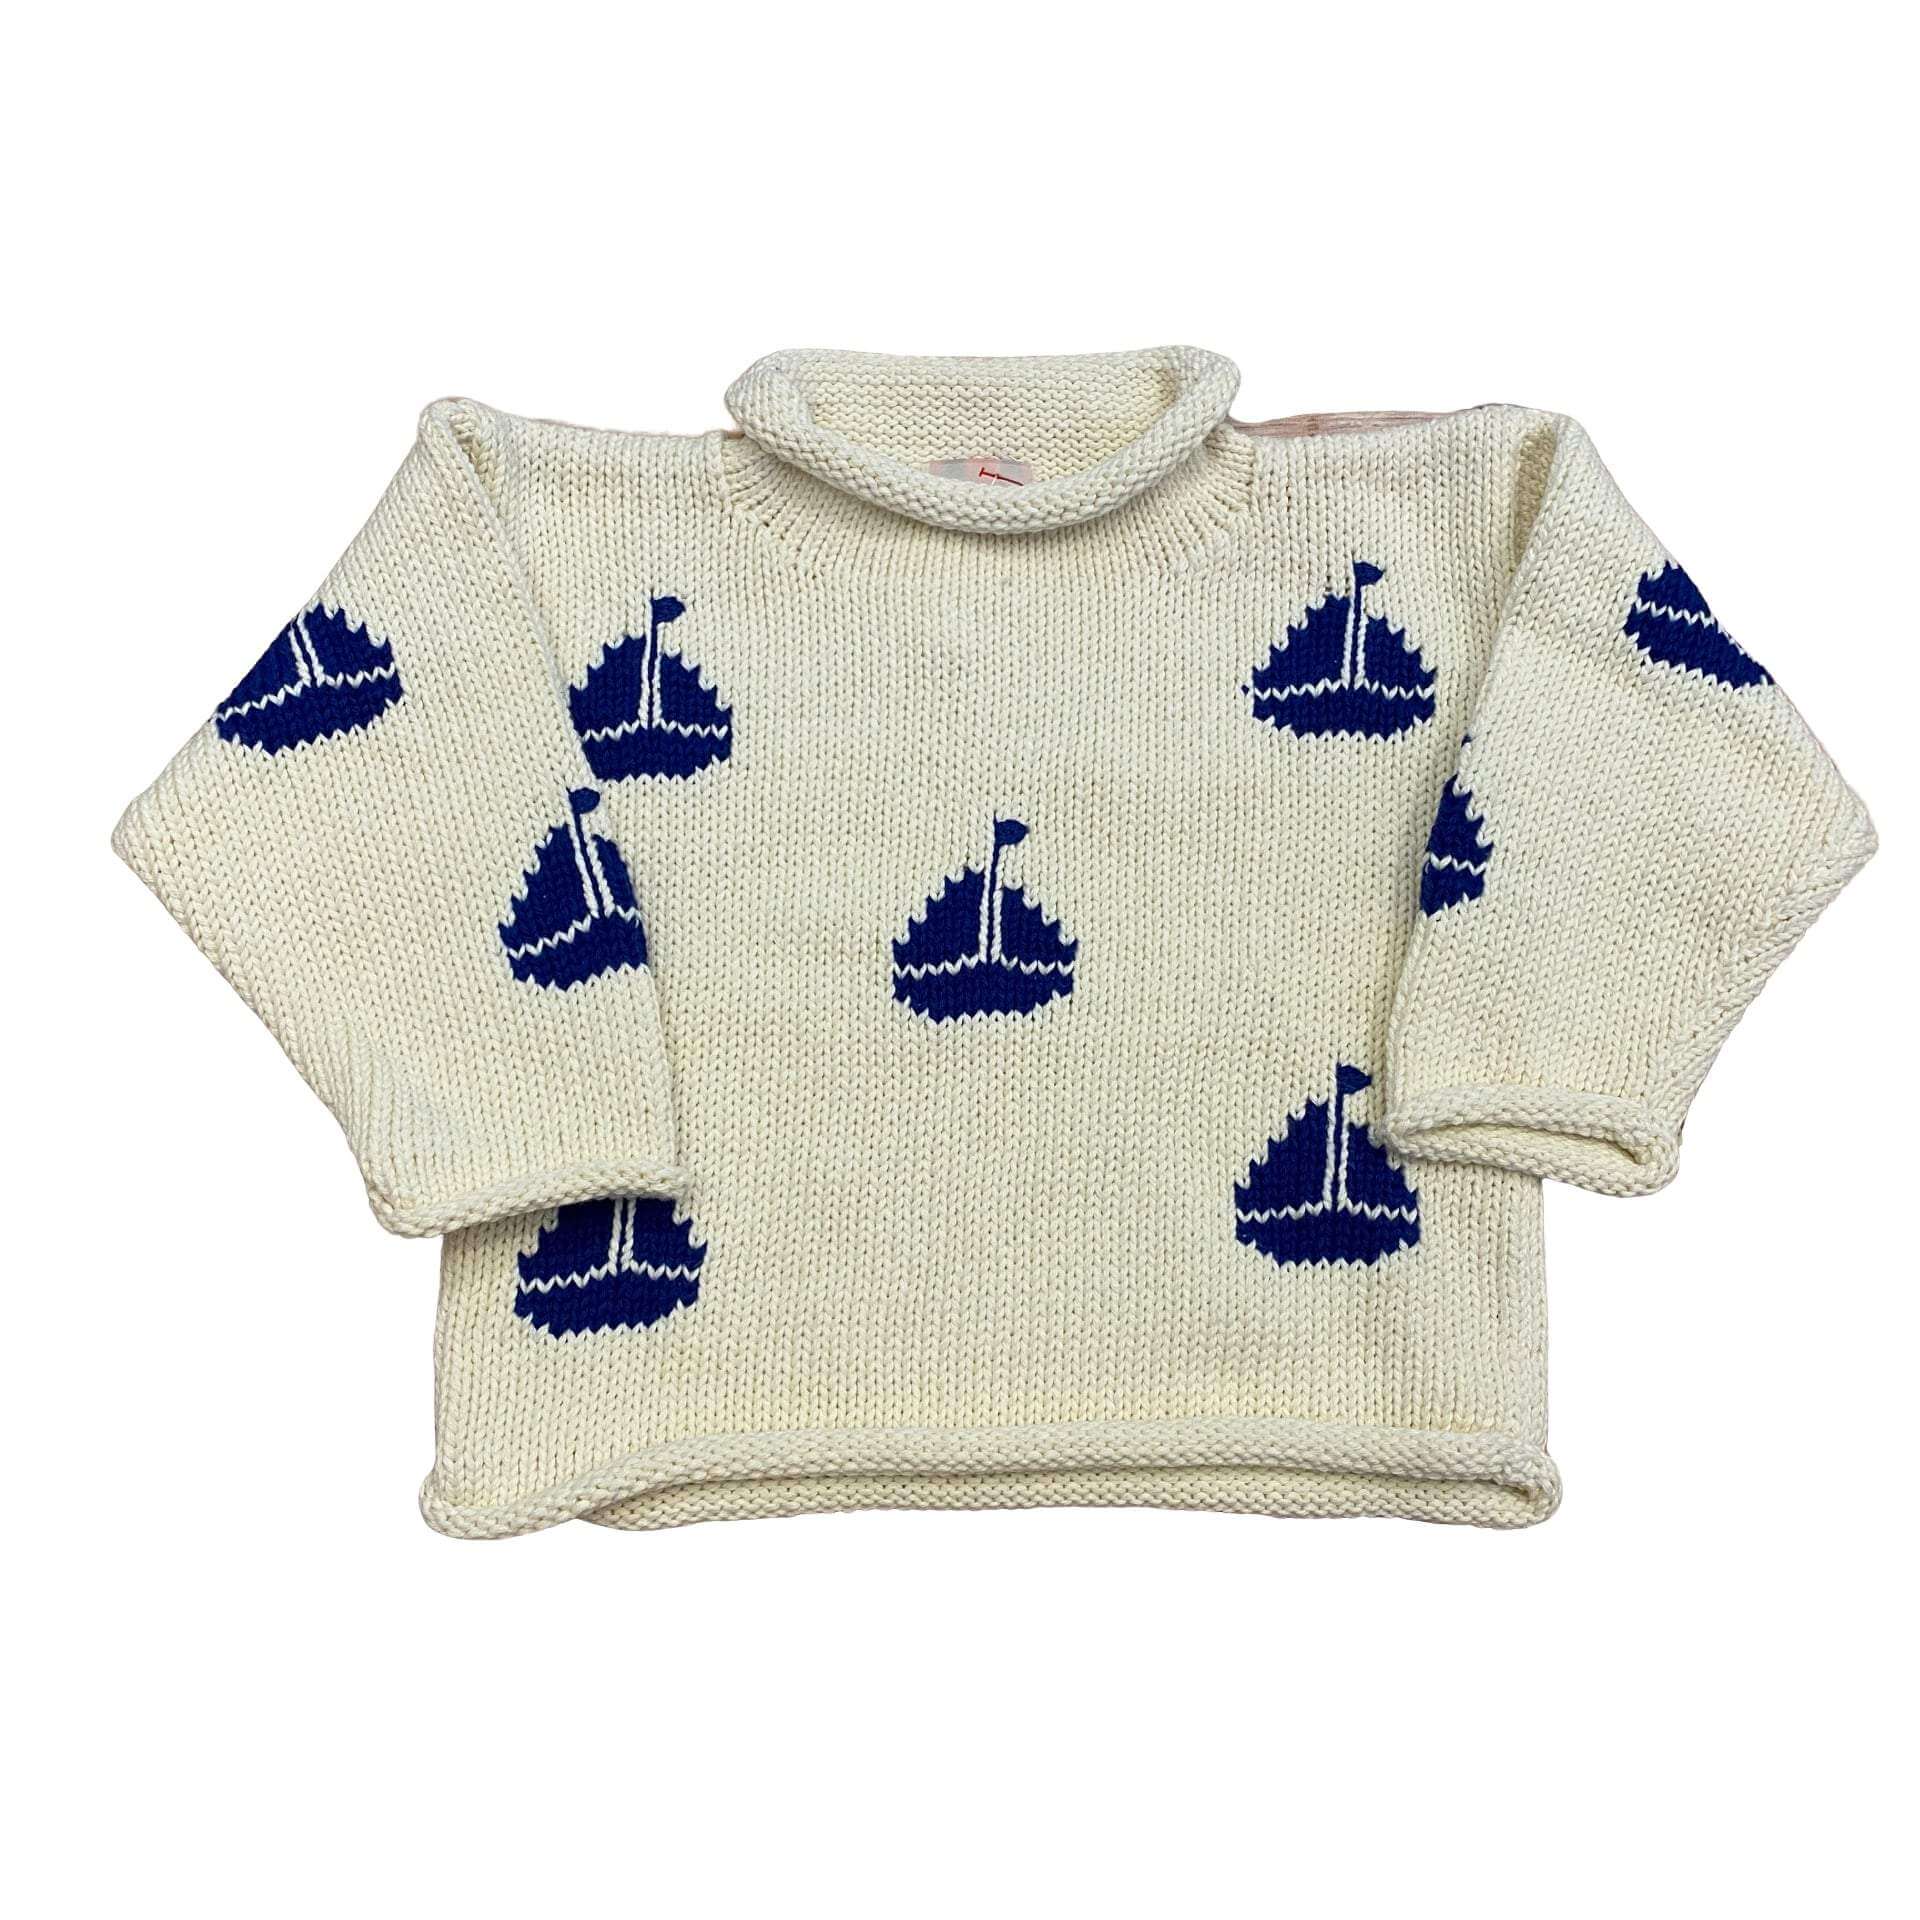 ivory roll neck sweater with dark blue sailboats knitted all over